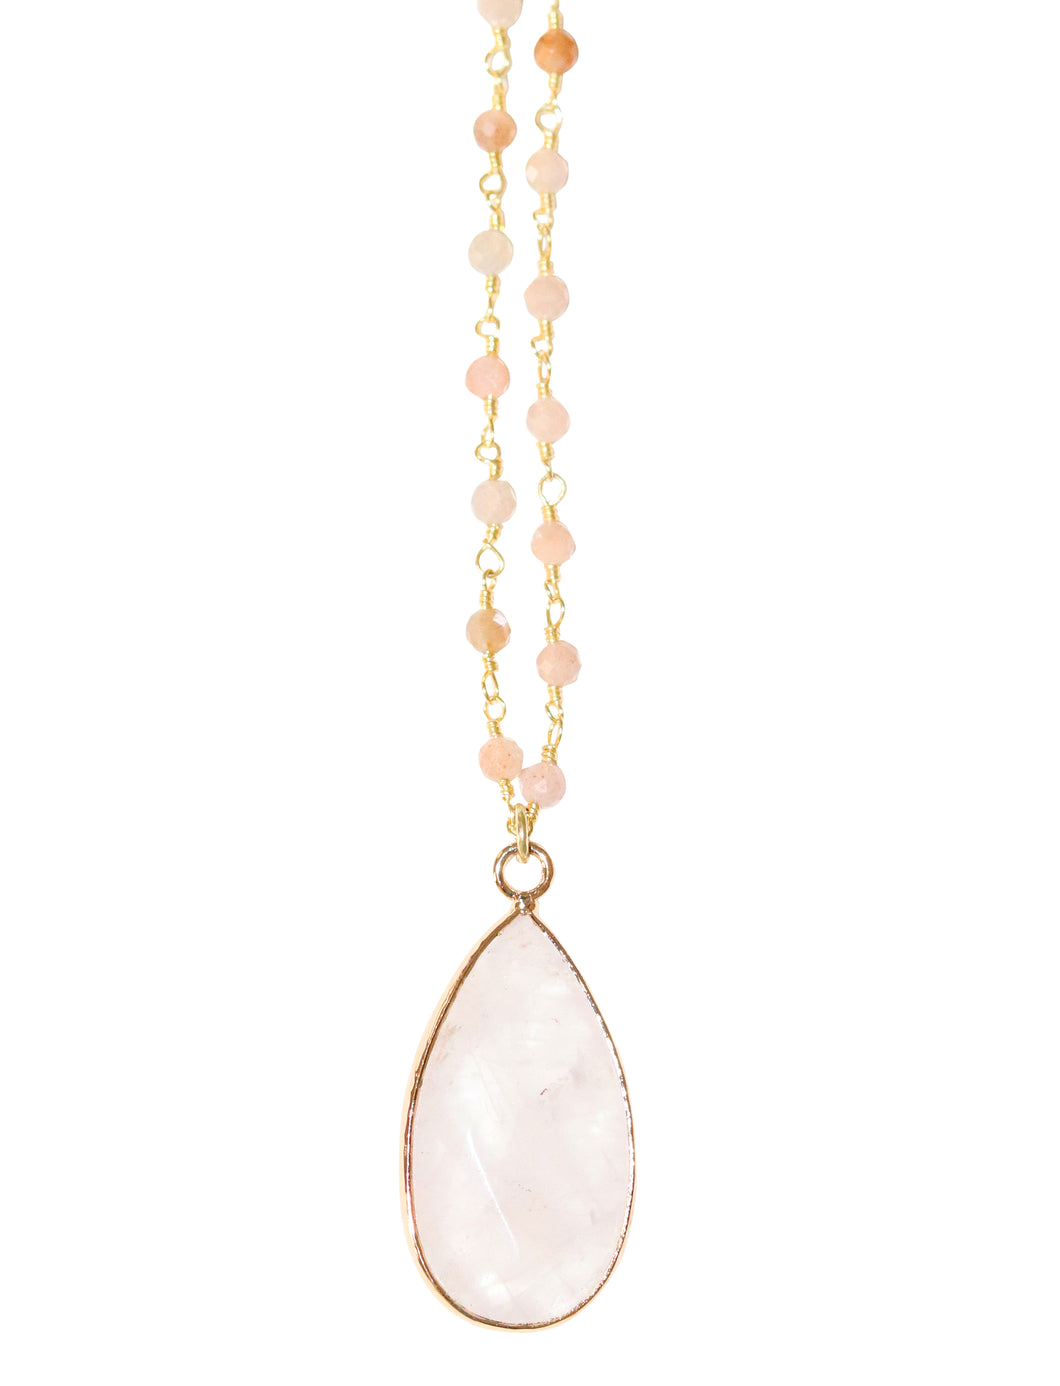 Pink rose quartz and moonstone beaded chain necklace handmade